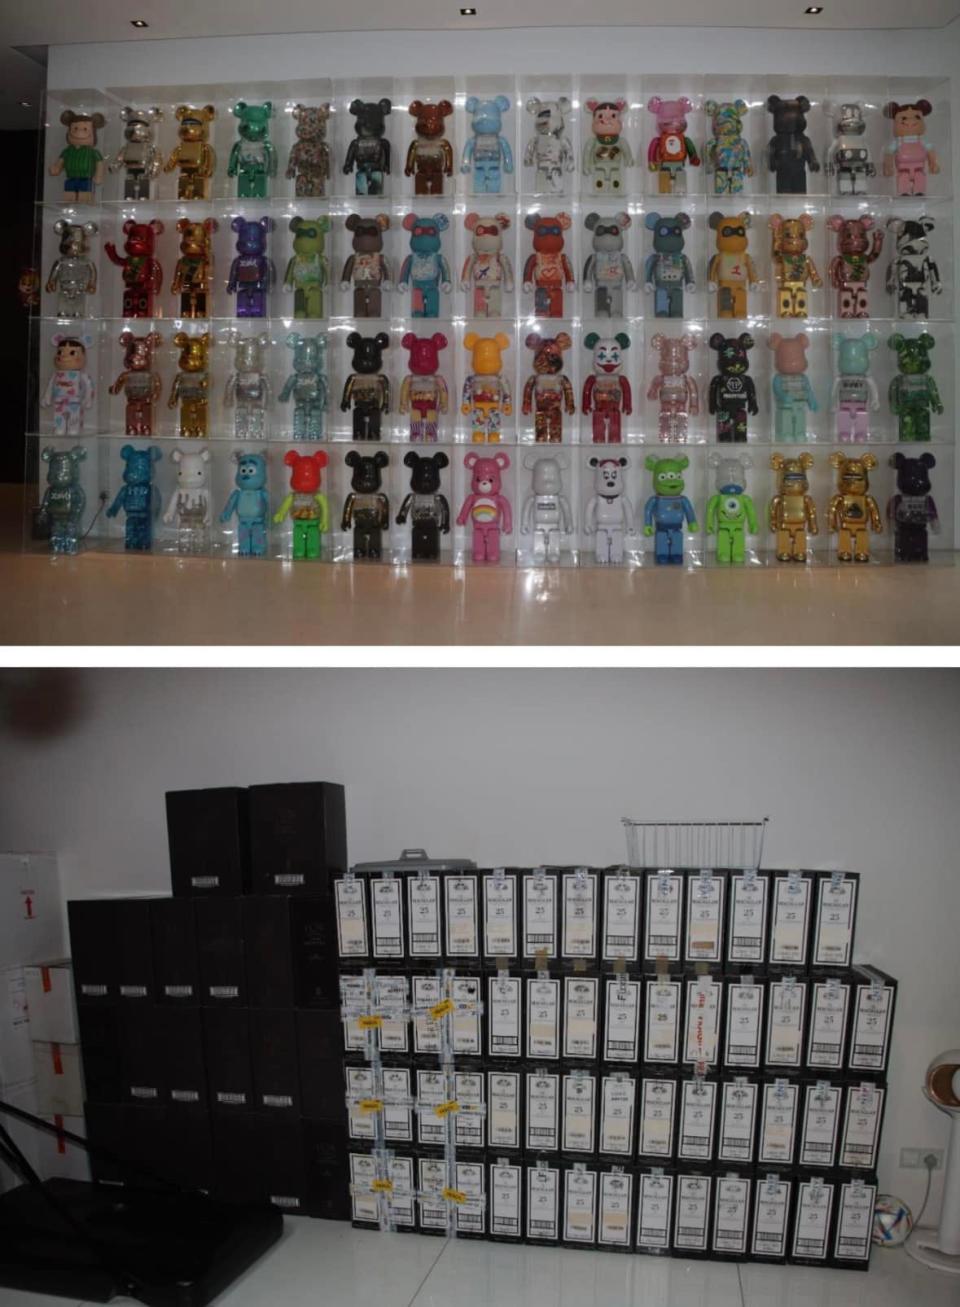 BE@RBRICK collections seized by the Singapore police